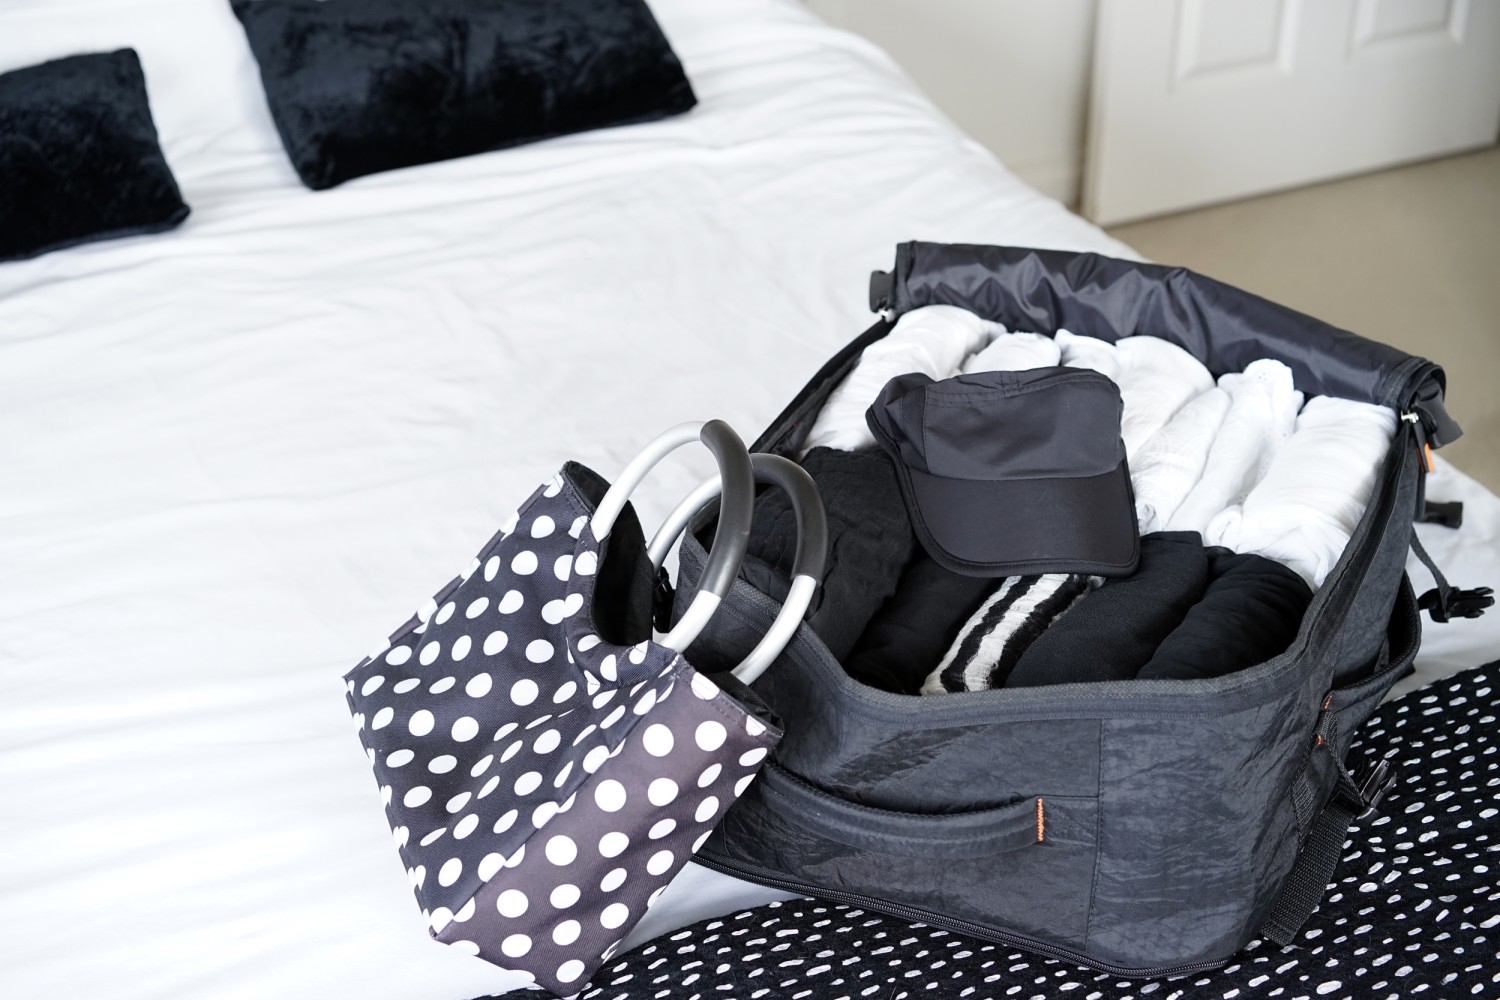 How to Pack a Suitcase in Thirty Minutes (Girls): 8 Steps